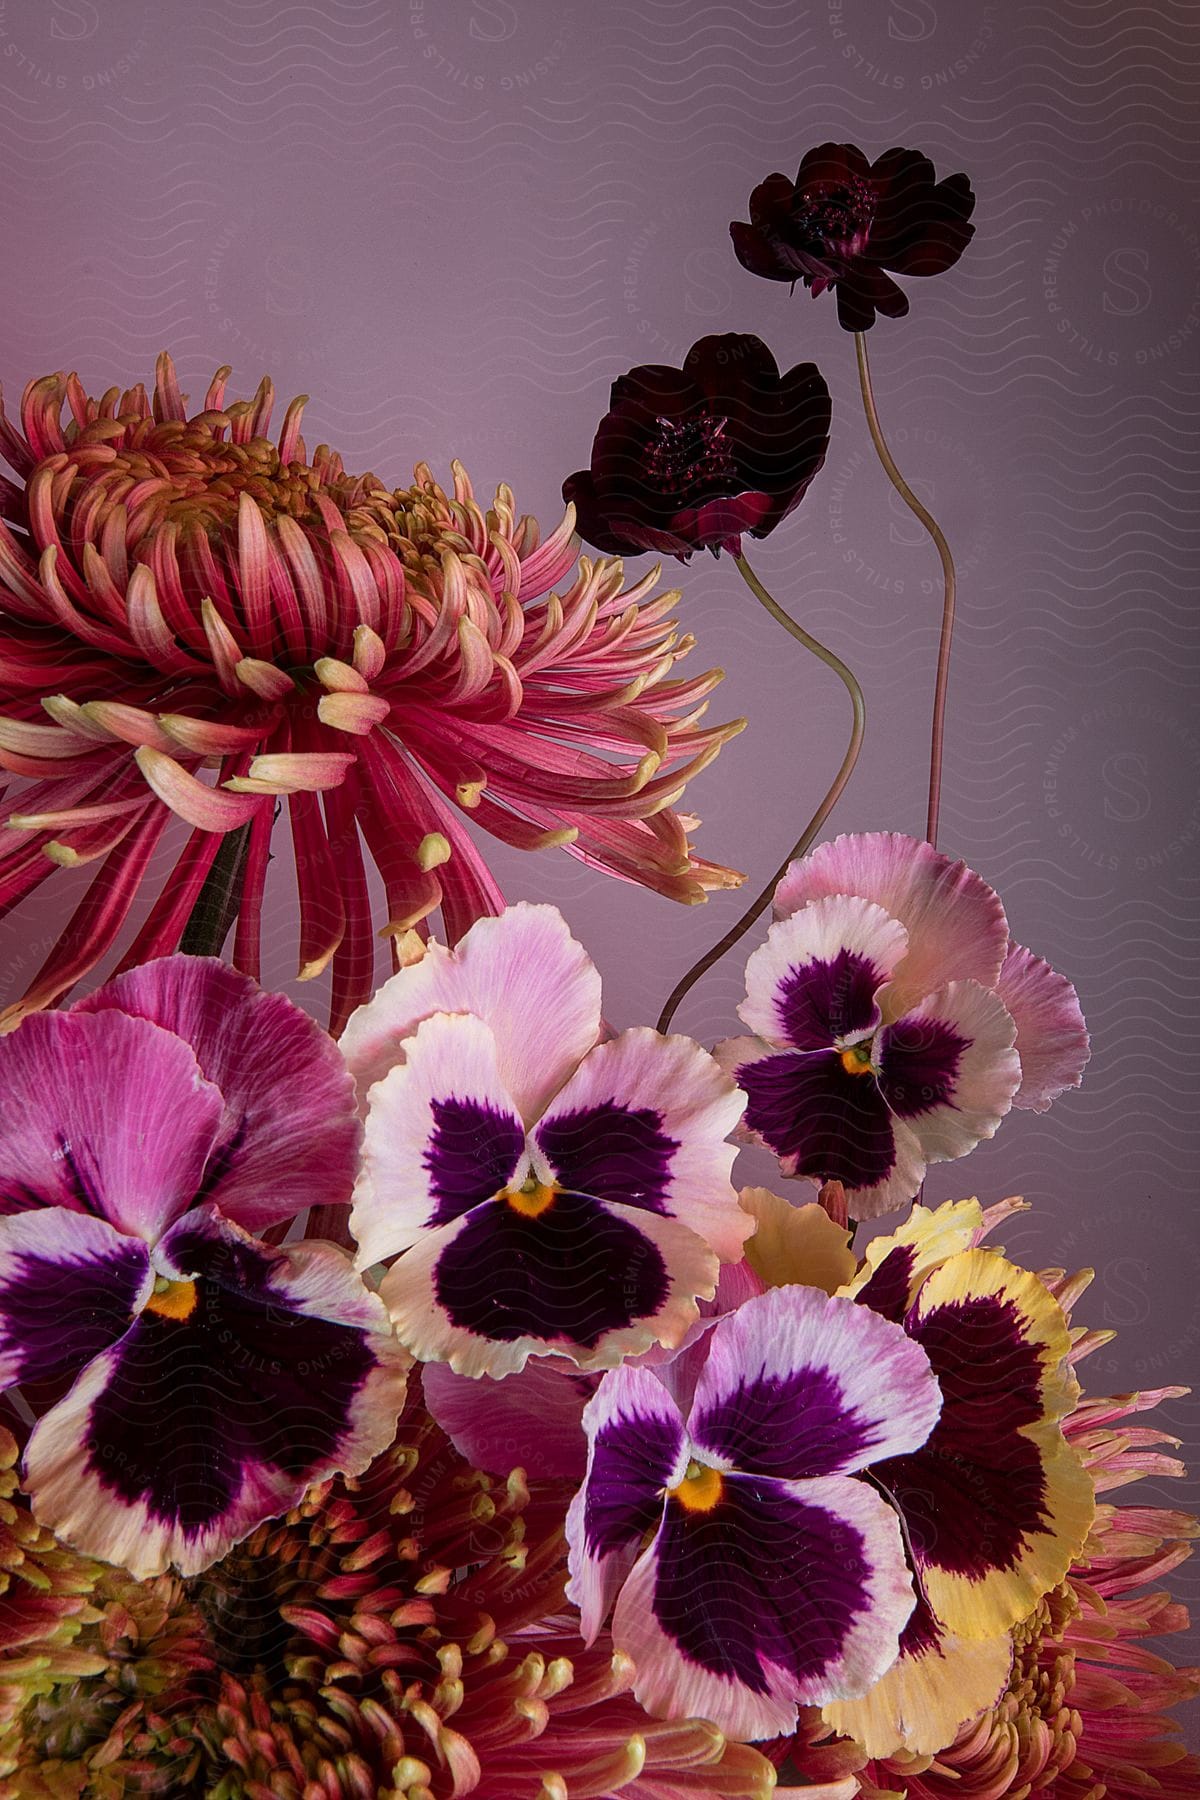 Still life of flowers of different species clustered on a purple background